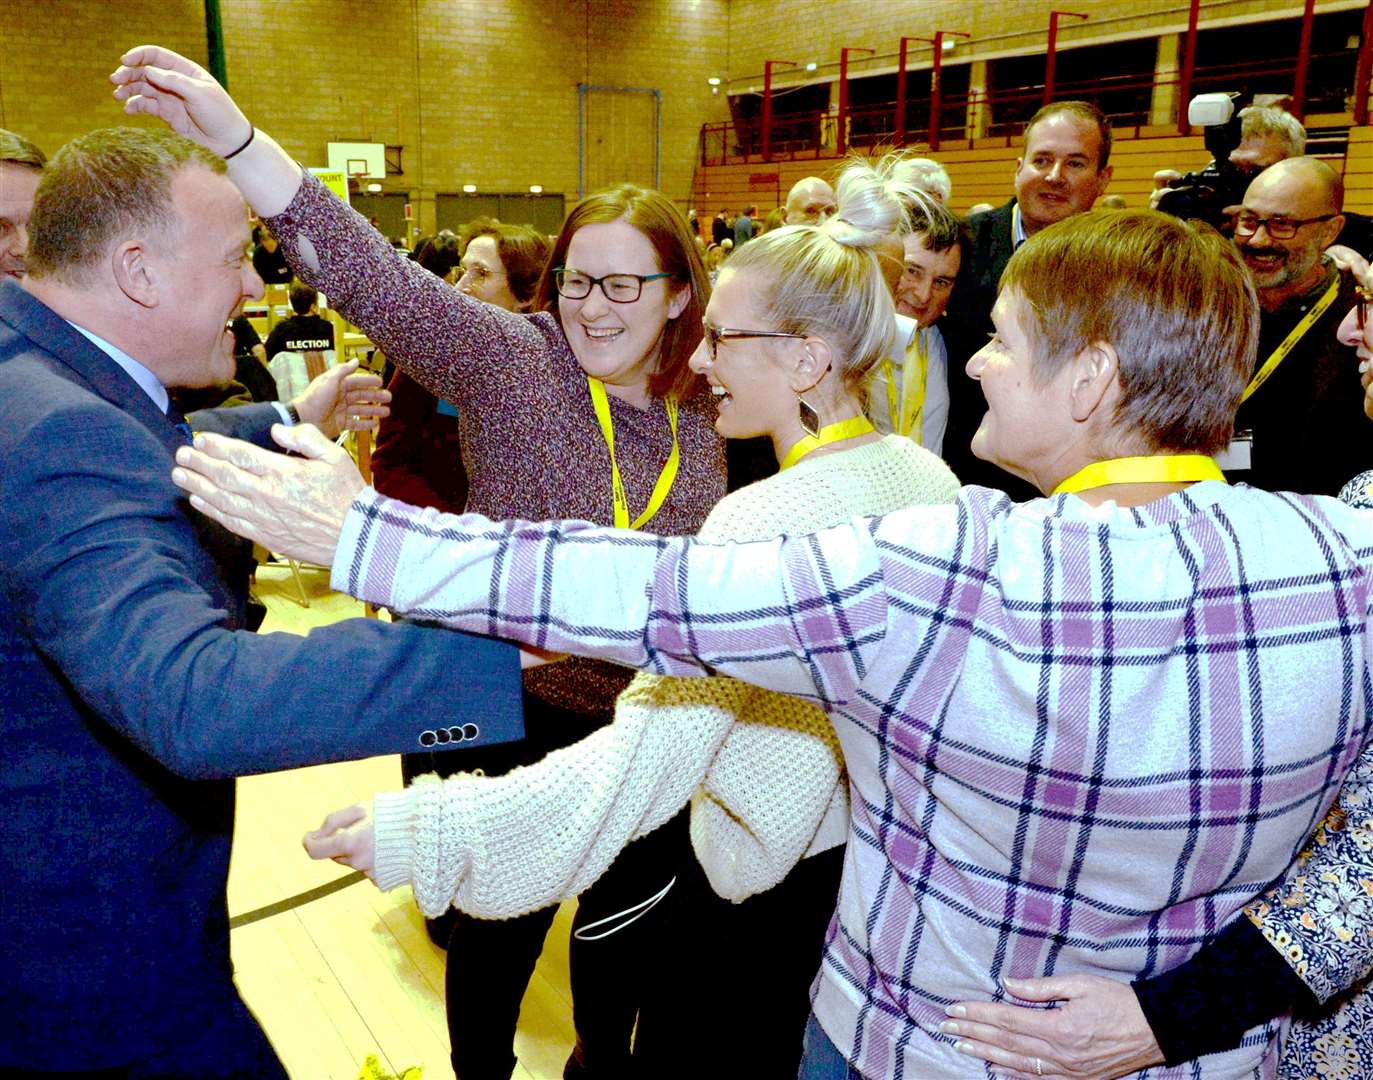 Newly re-elected MP Drew Hendry celebrates with his team after securing a huge majority and record third win in a row.